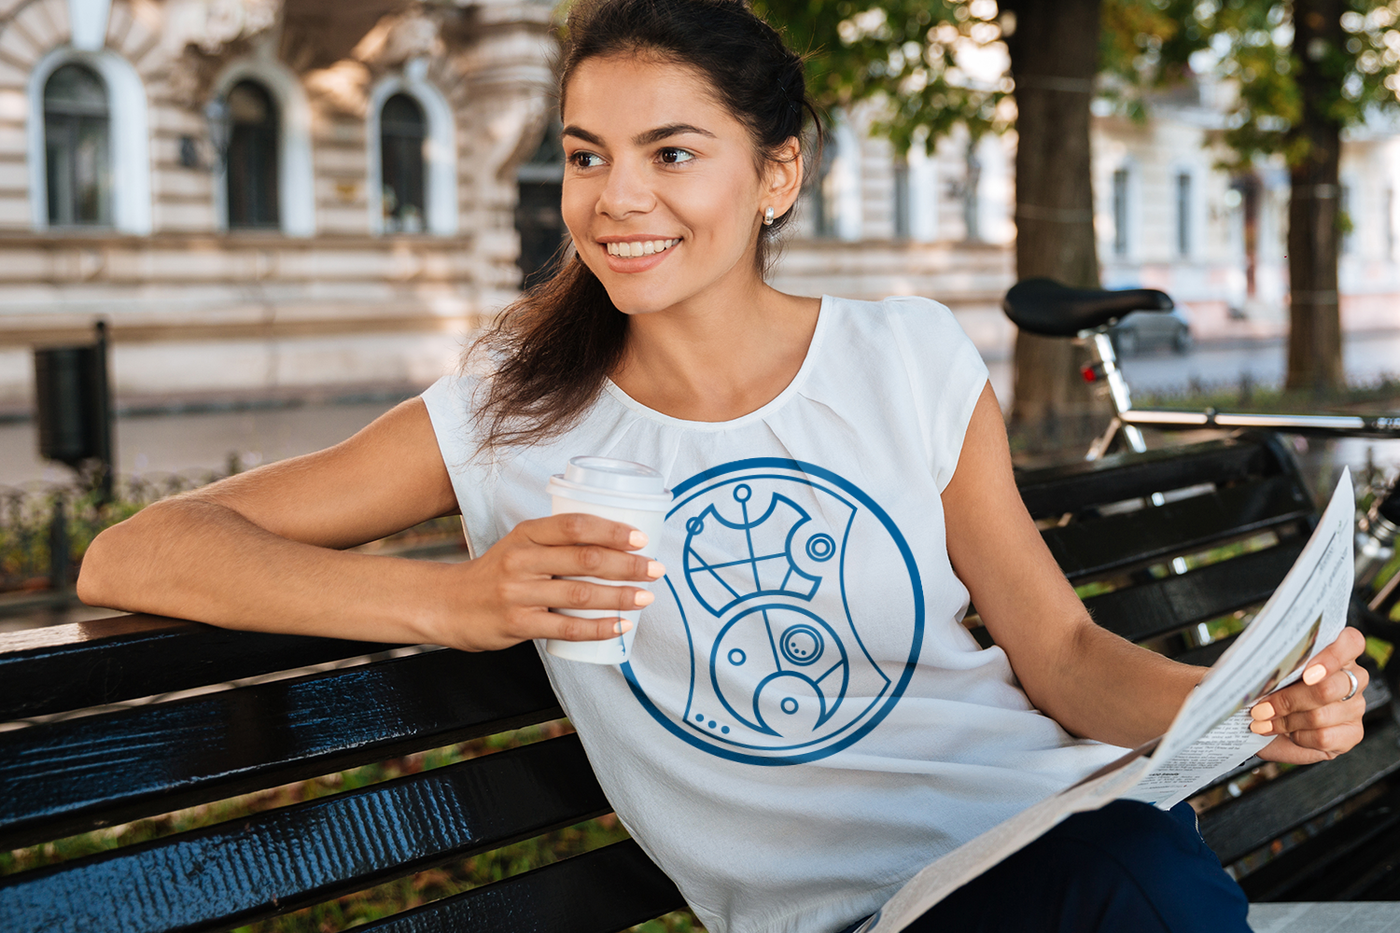 Woman of color in a white shirt sitting on a bench. He shirt has a circular alien language design in blue.